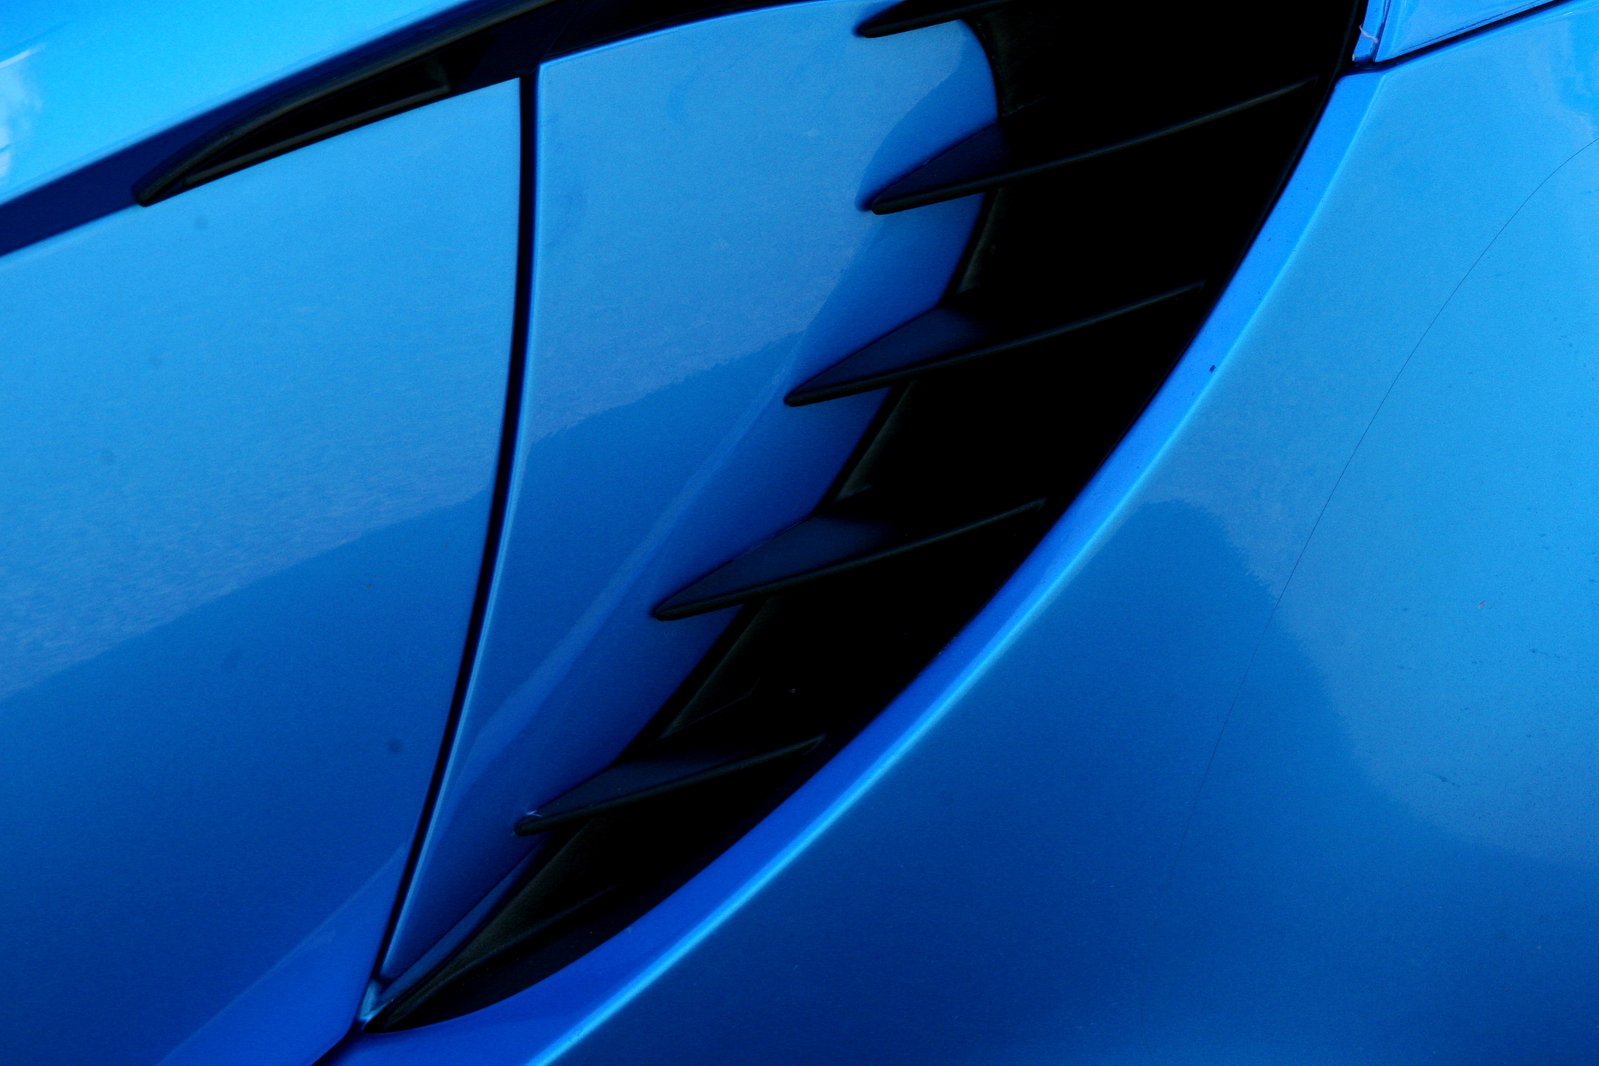 a close up image of the hood of a blue sports car